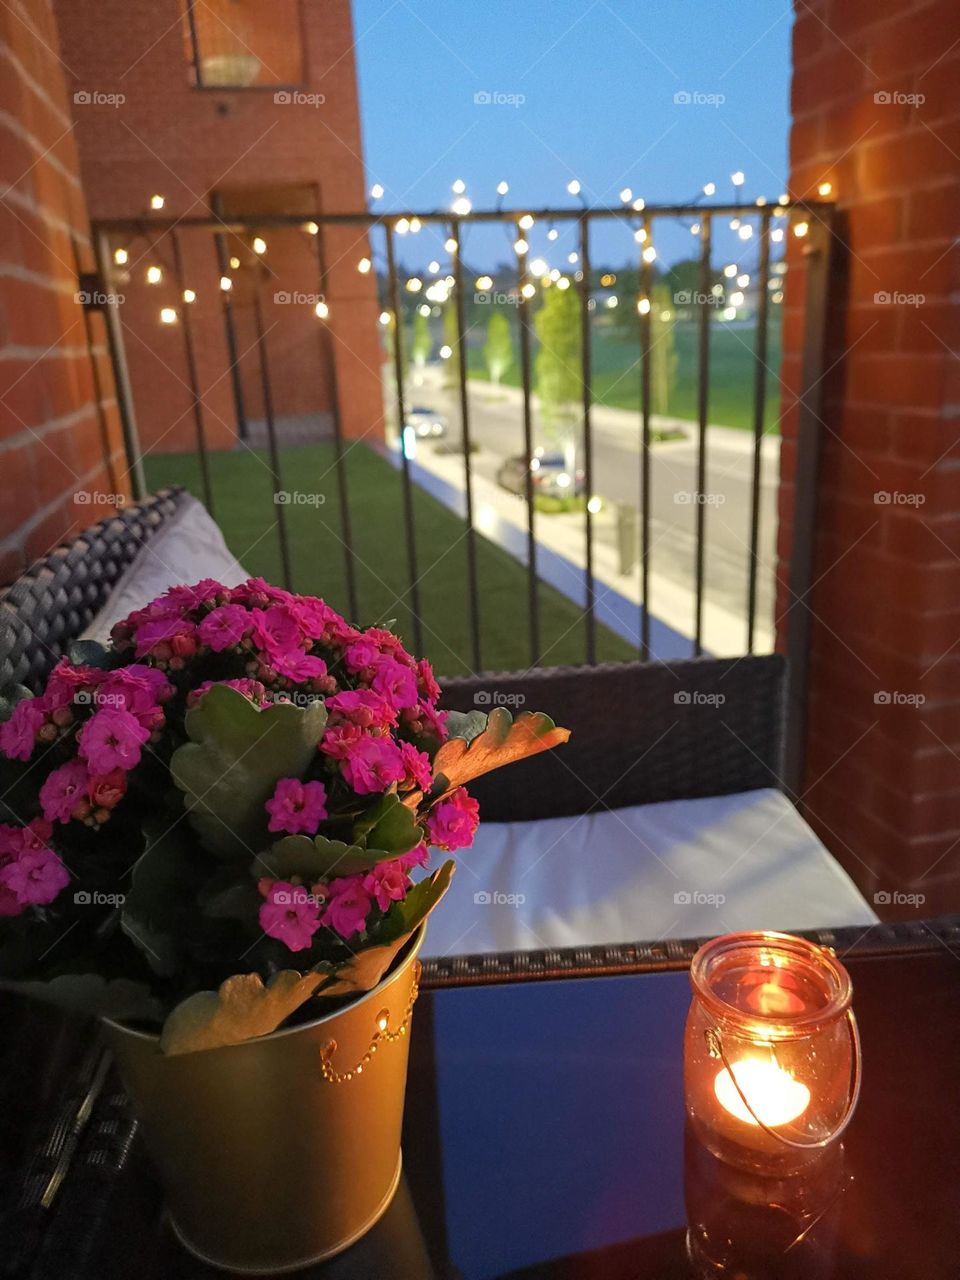 My favorite spot at home. Cozy and beautiful balcony.